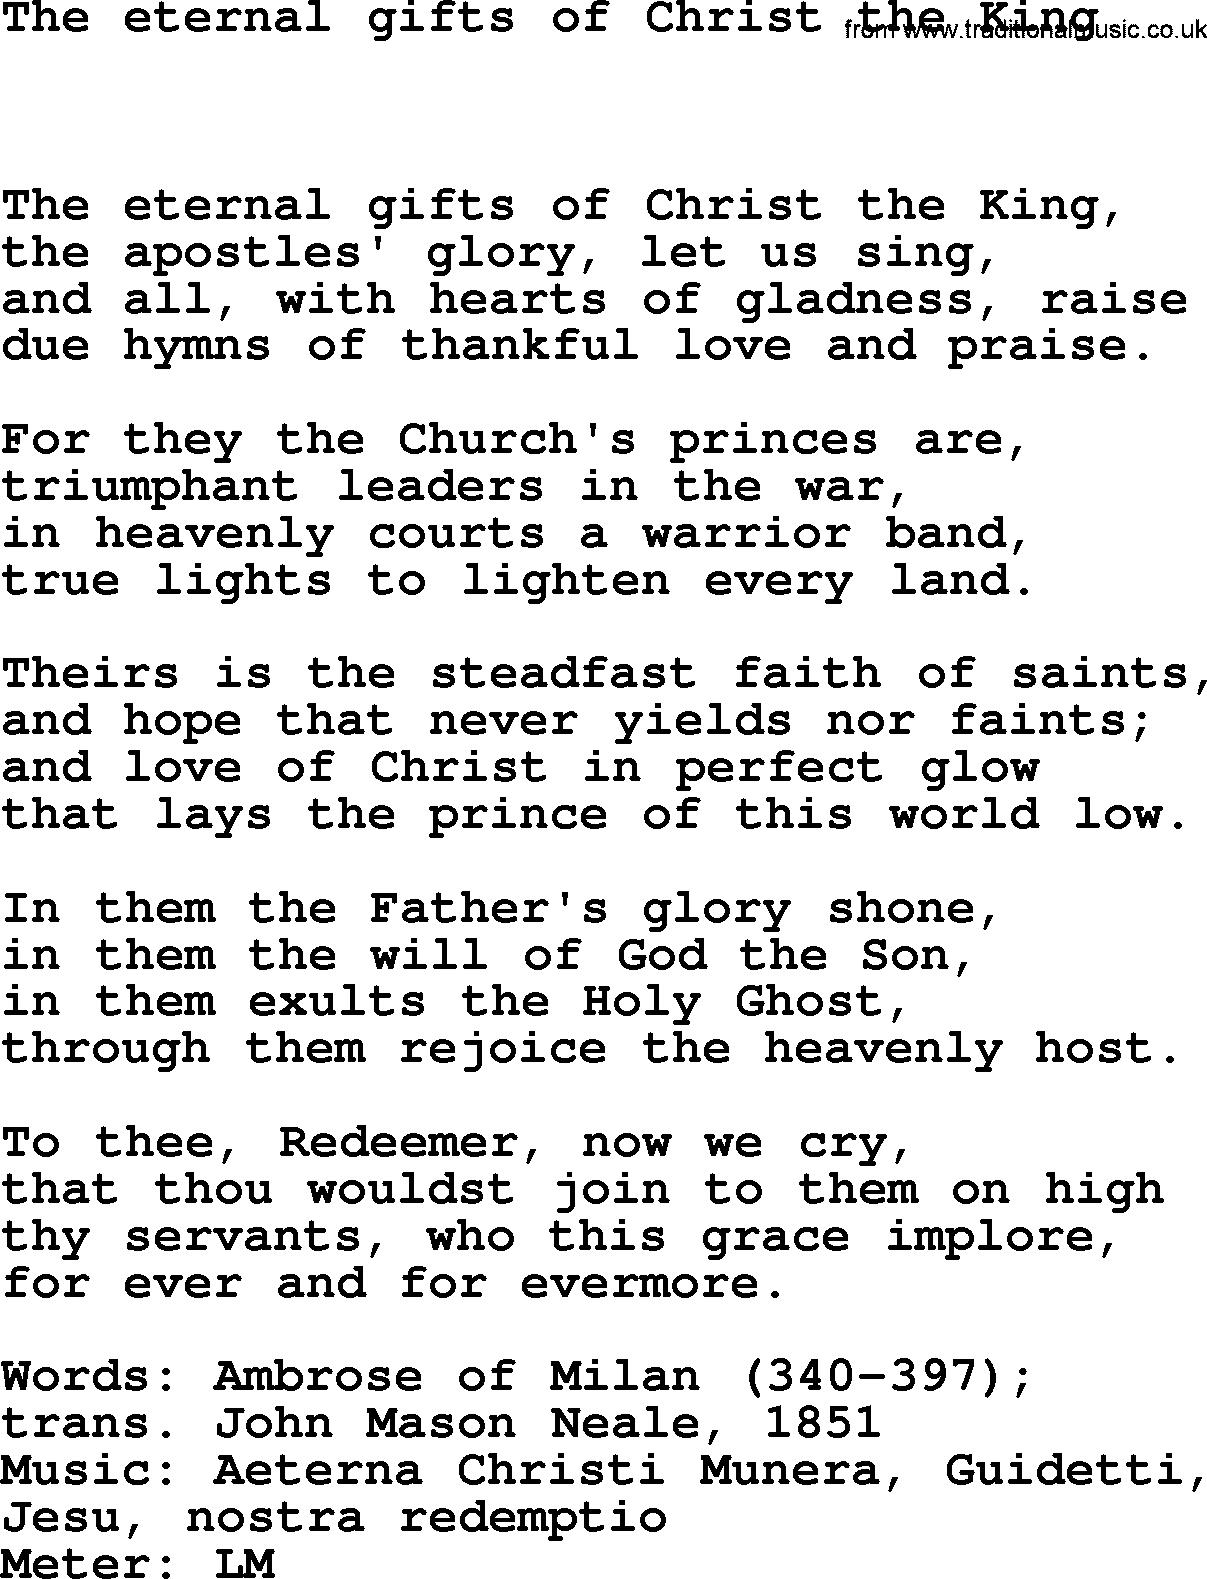 Book of Common Praise Hymn: The Eternal Gifts Of Christ The King.txt lyrics with midi music